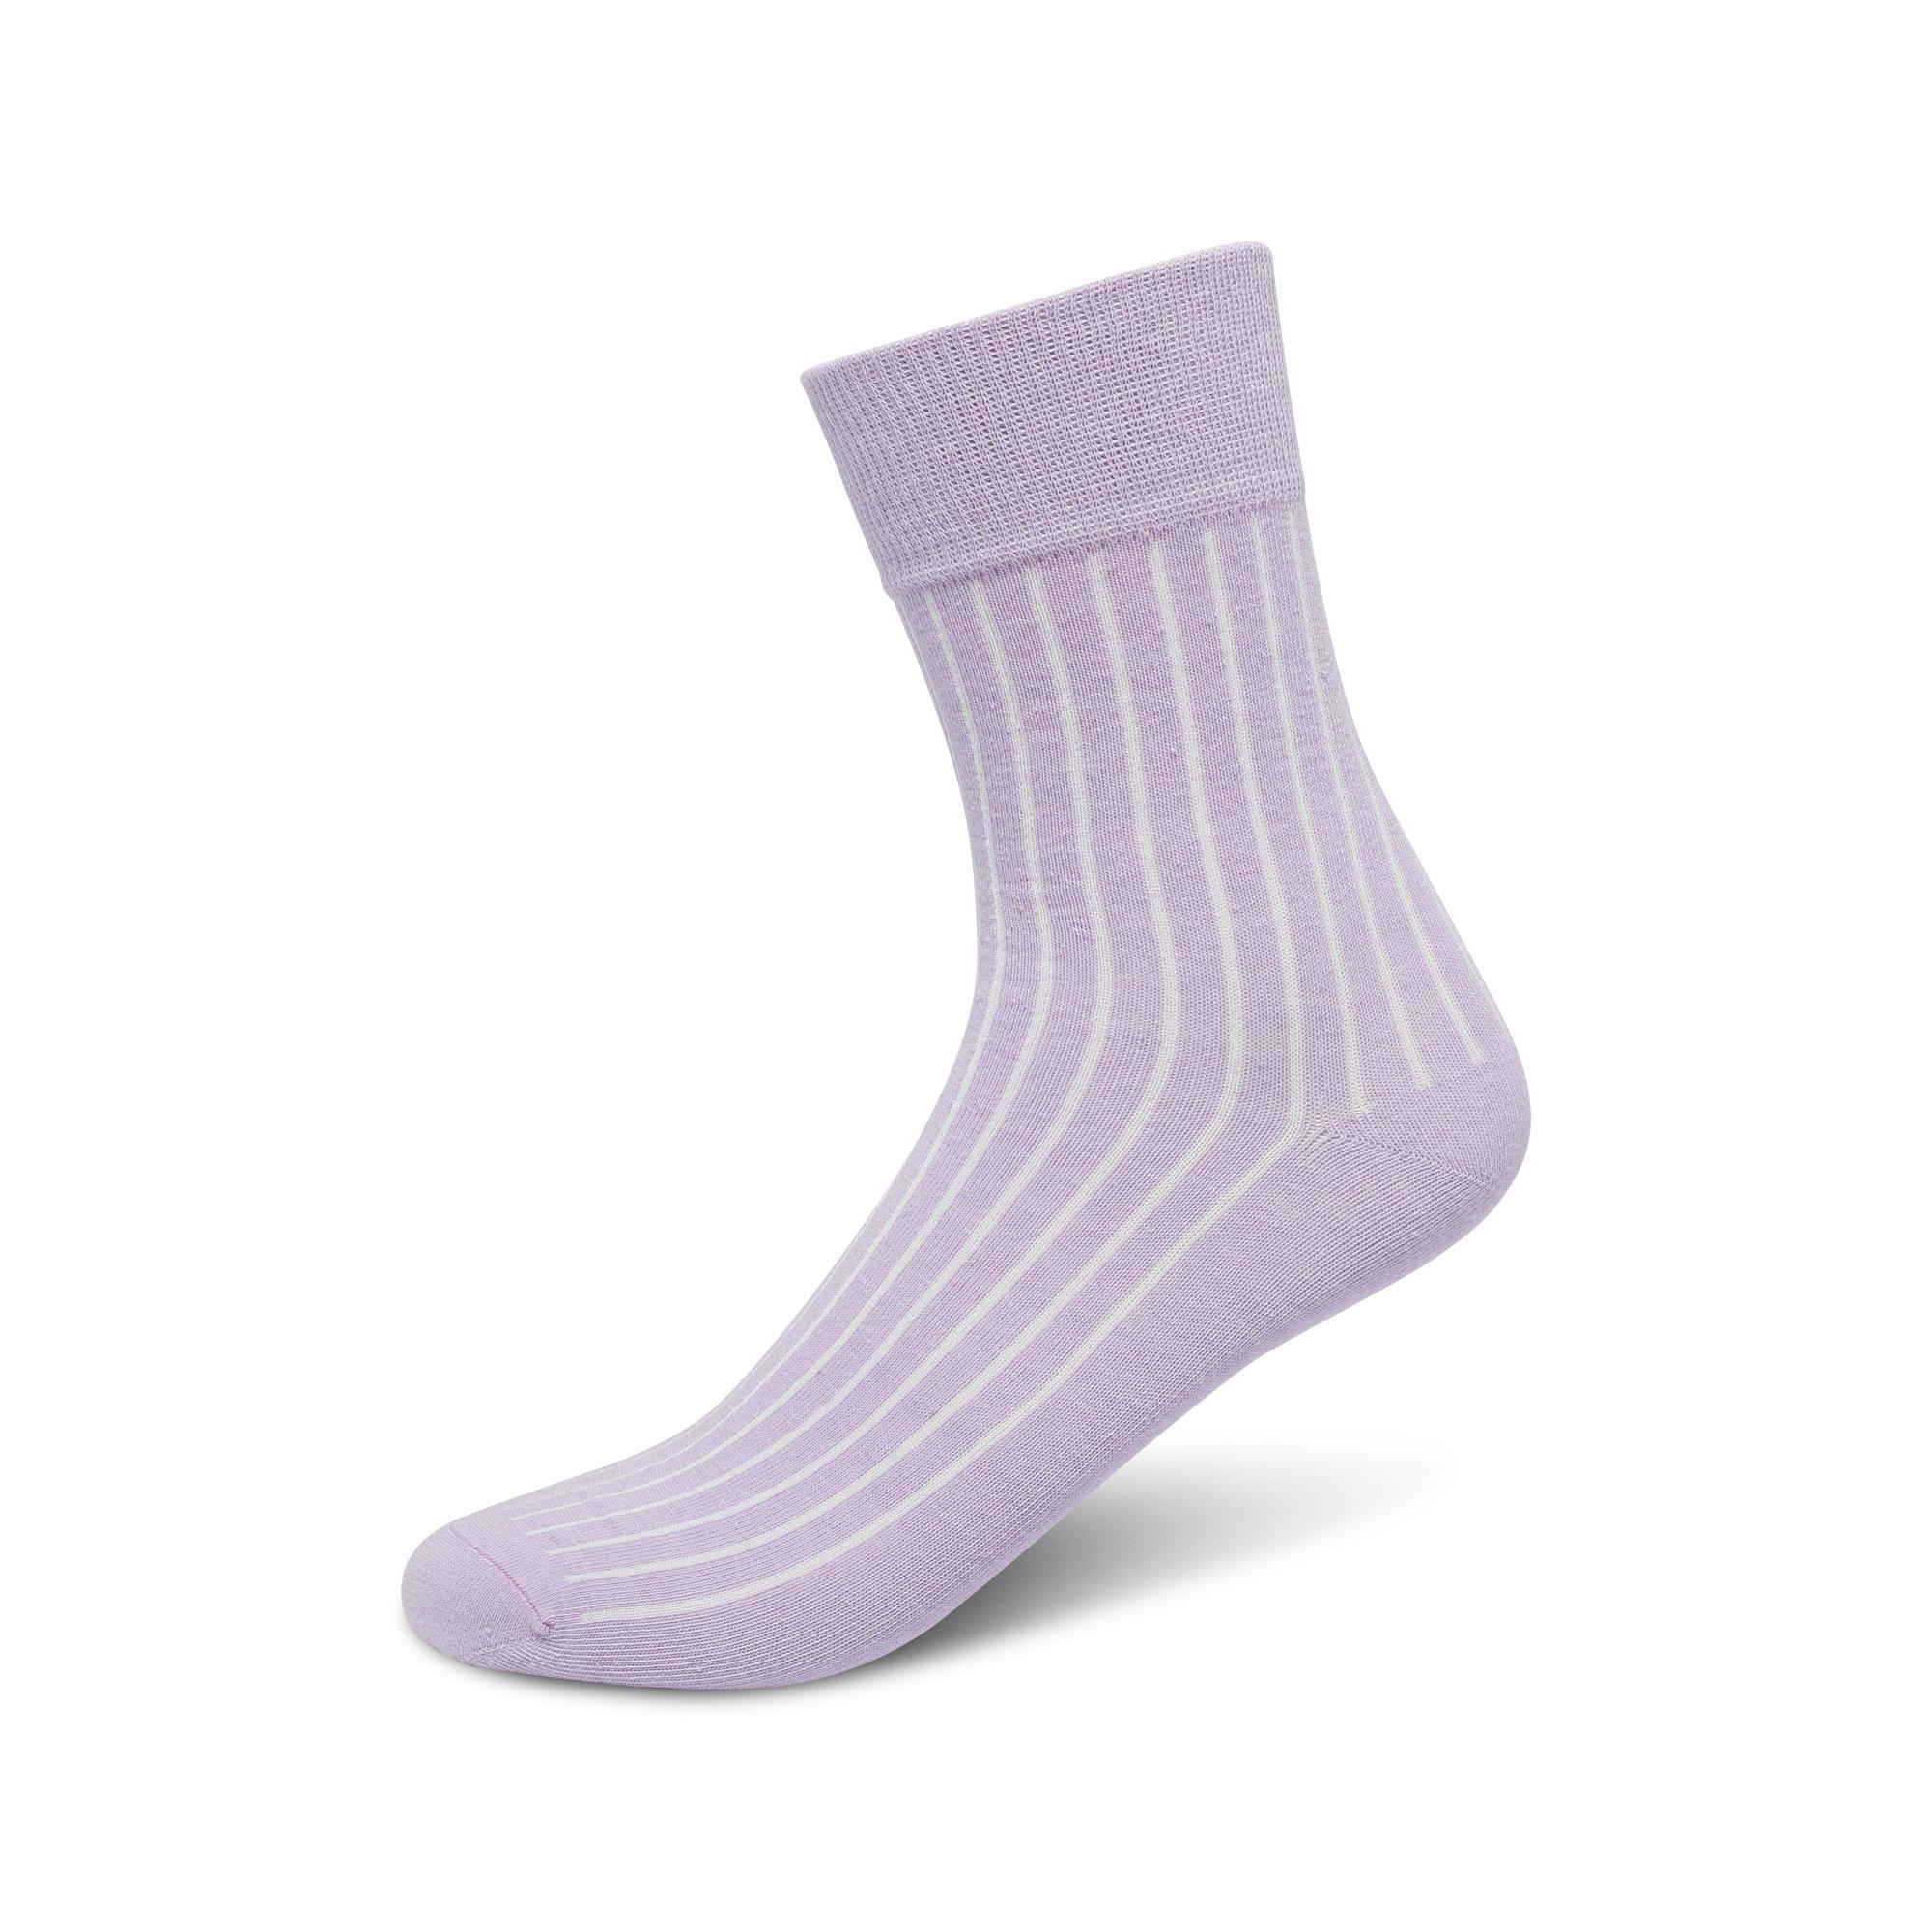 Manor Woman Classic Multipack 5p Multipack, chaussettes 